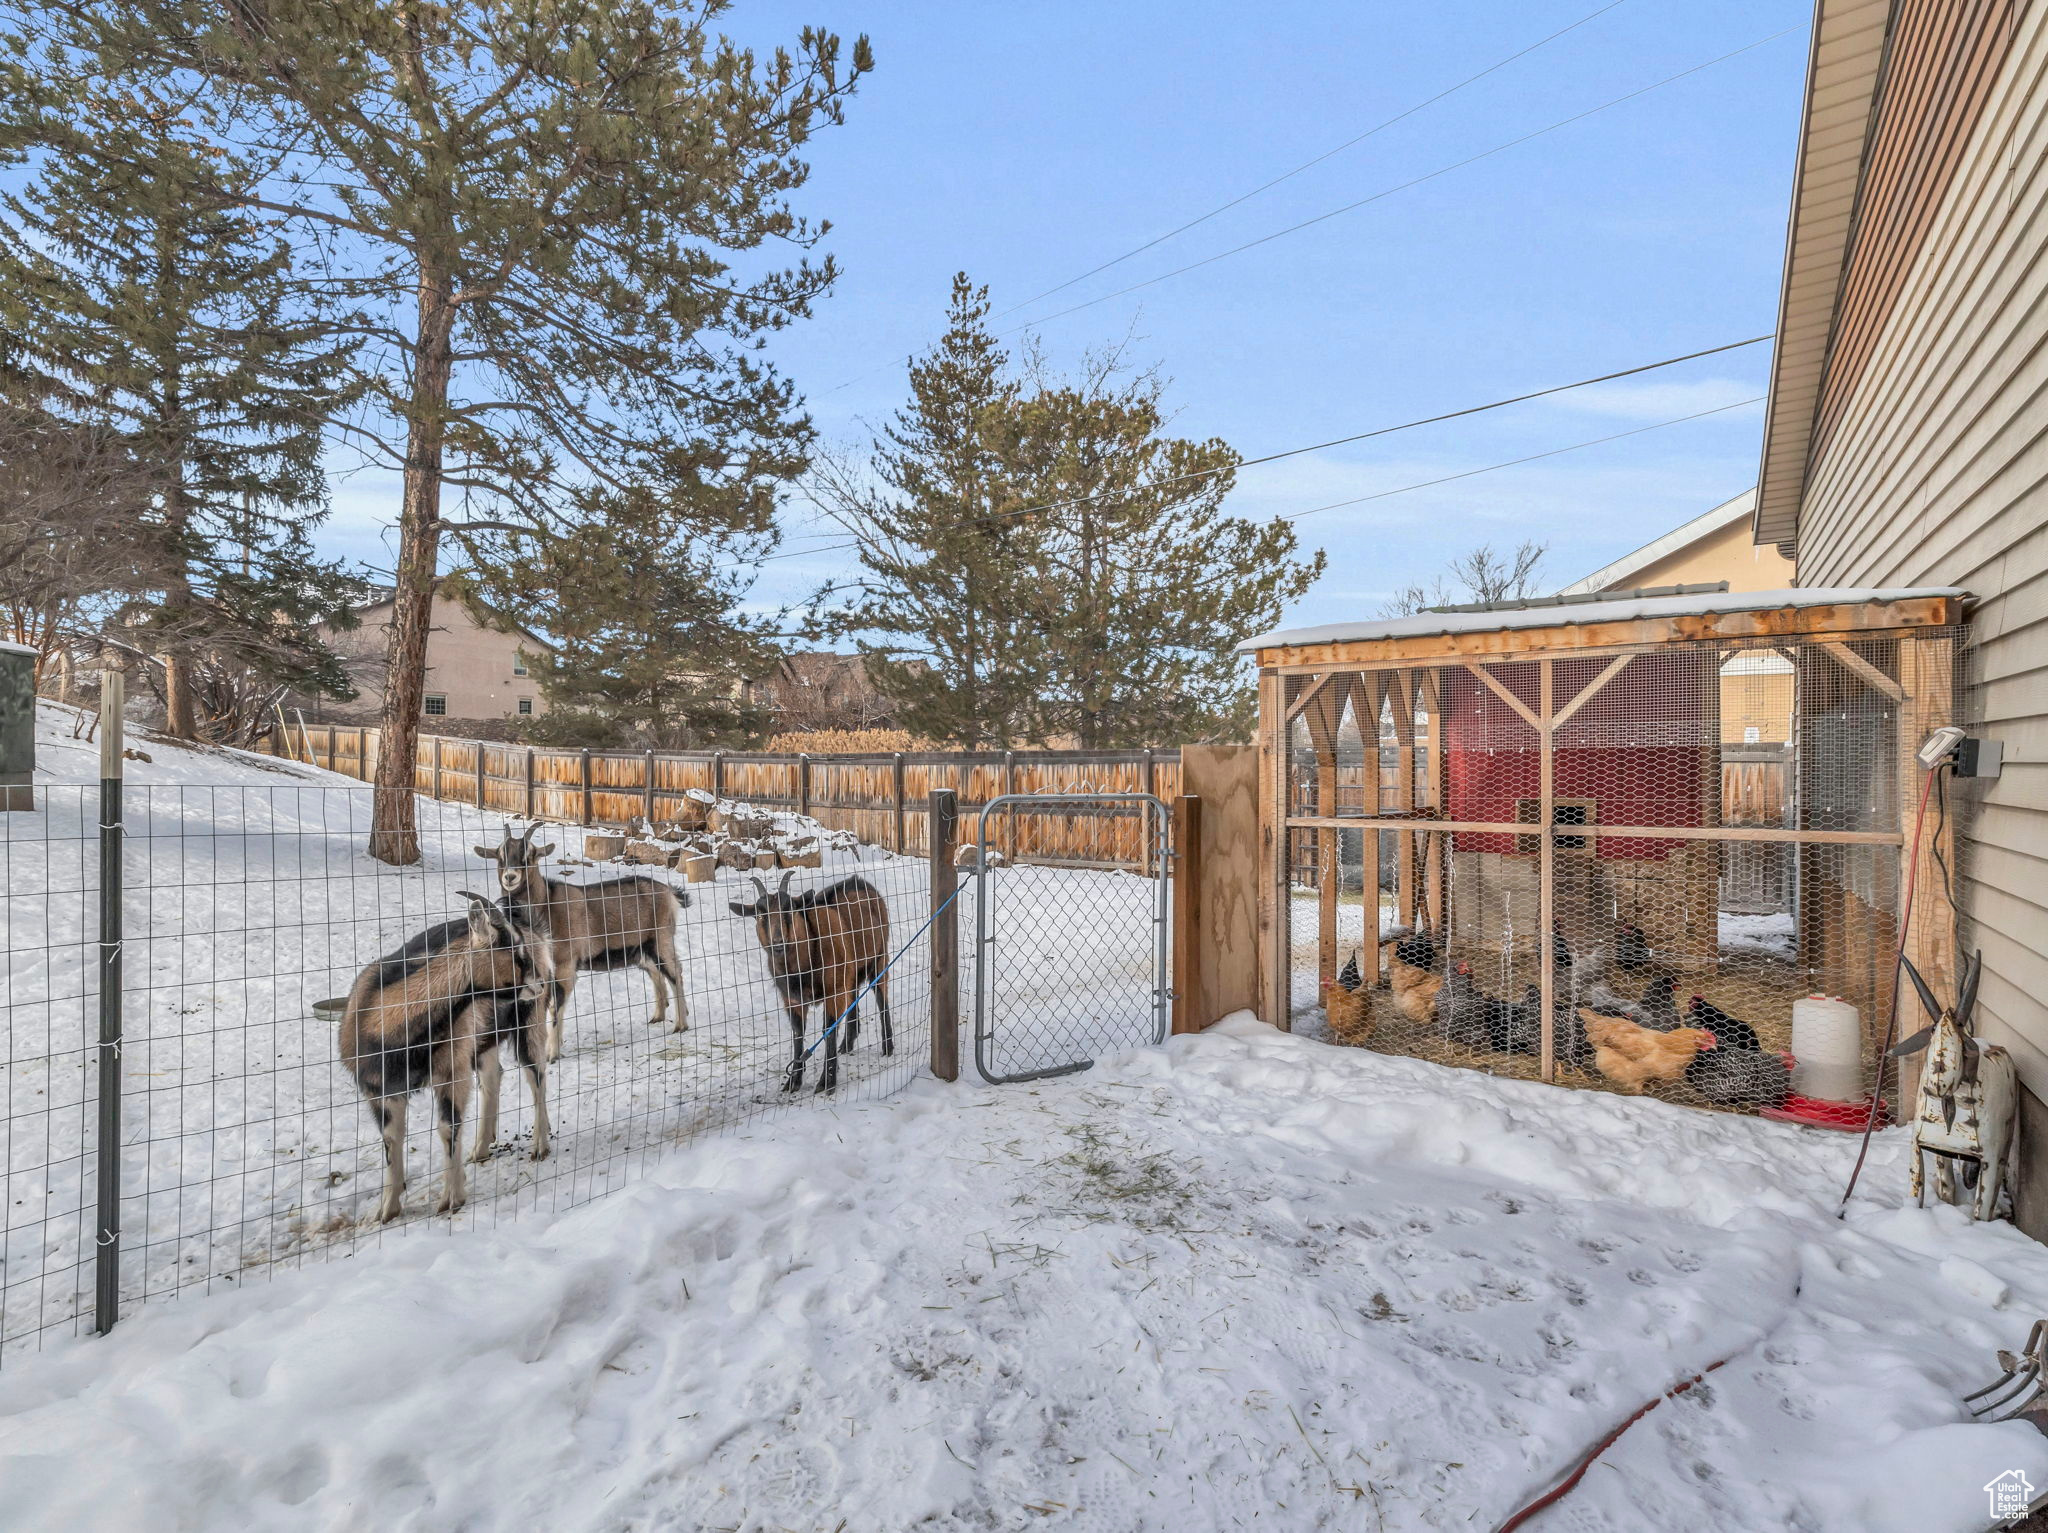 Large chicken coop with fenced goat grazing area behind detached garage.